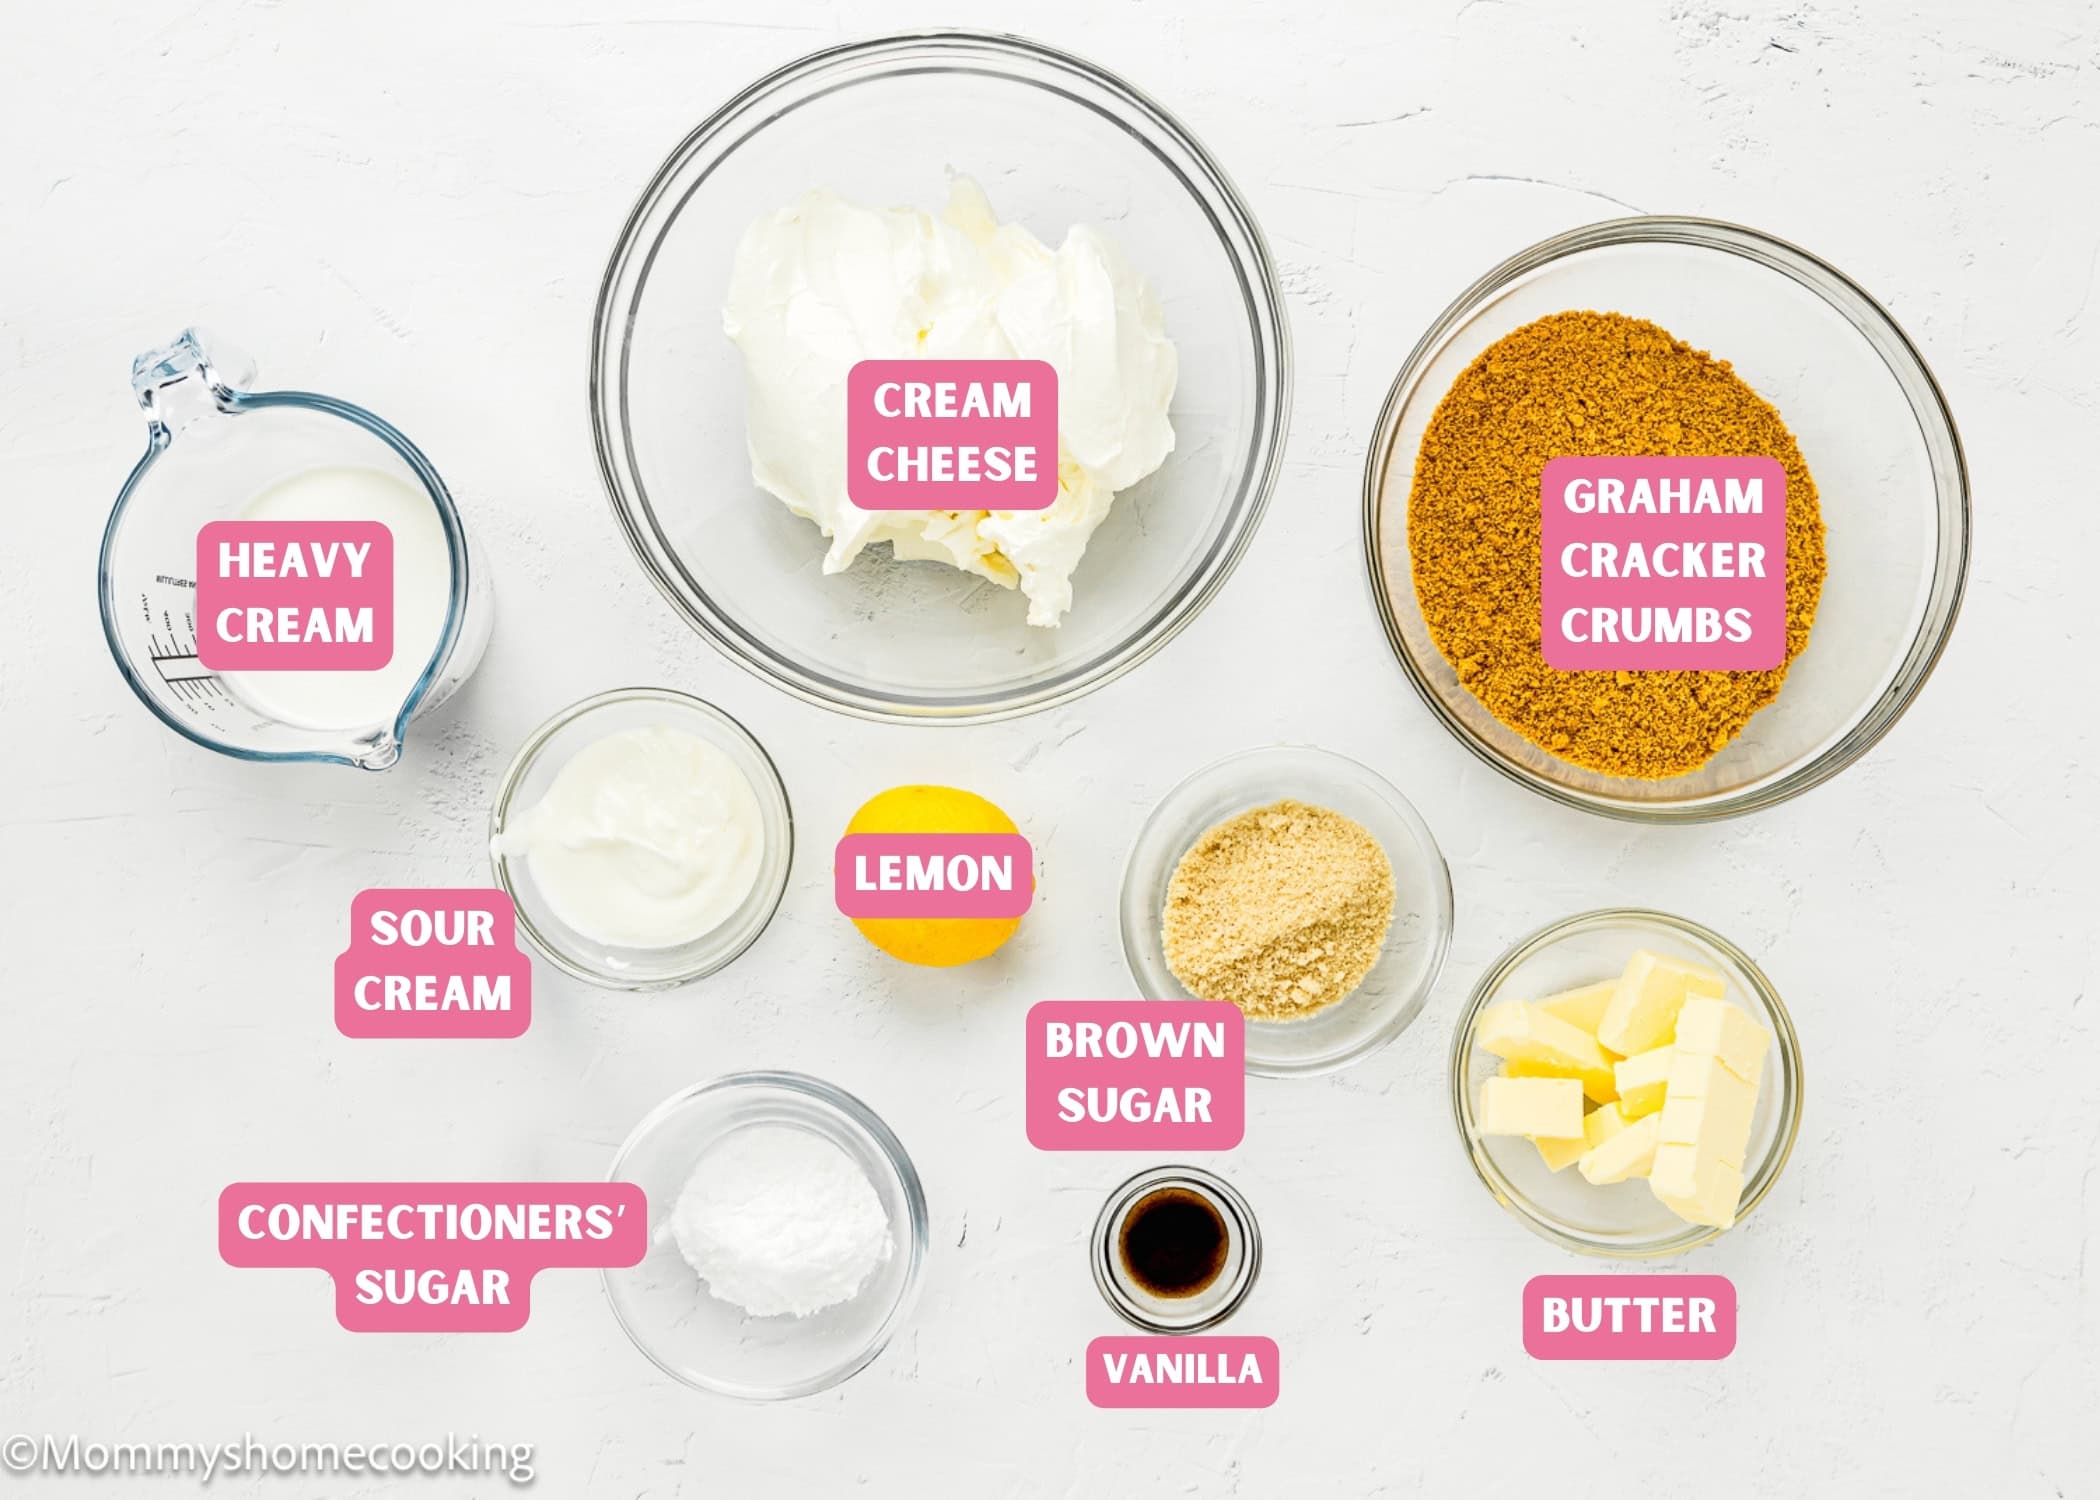 Ingredients needed to make Easy No Bake Cheesecake with name tags.